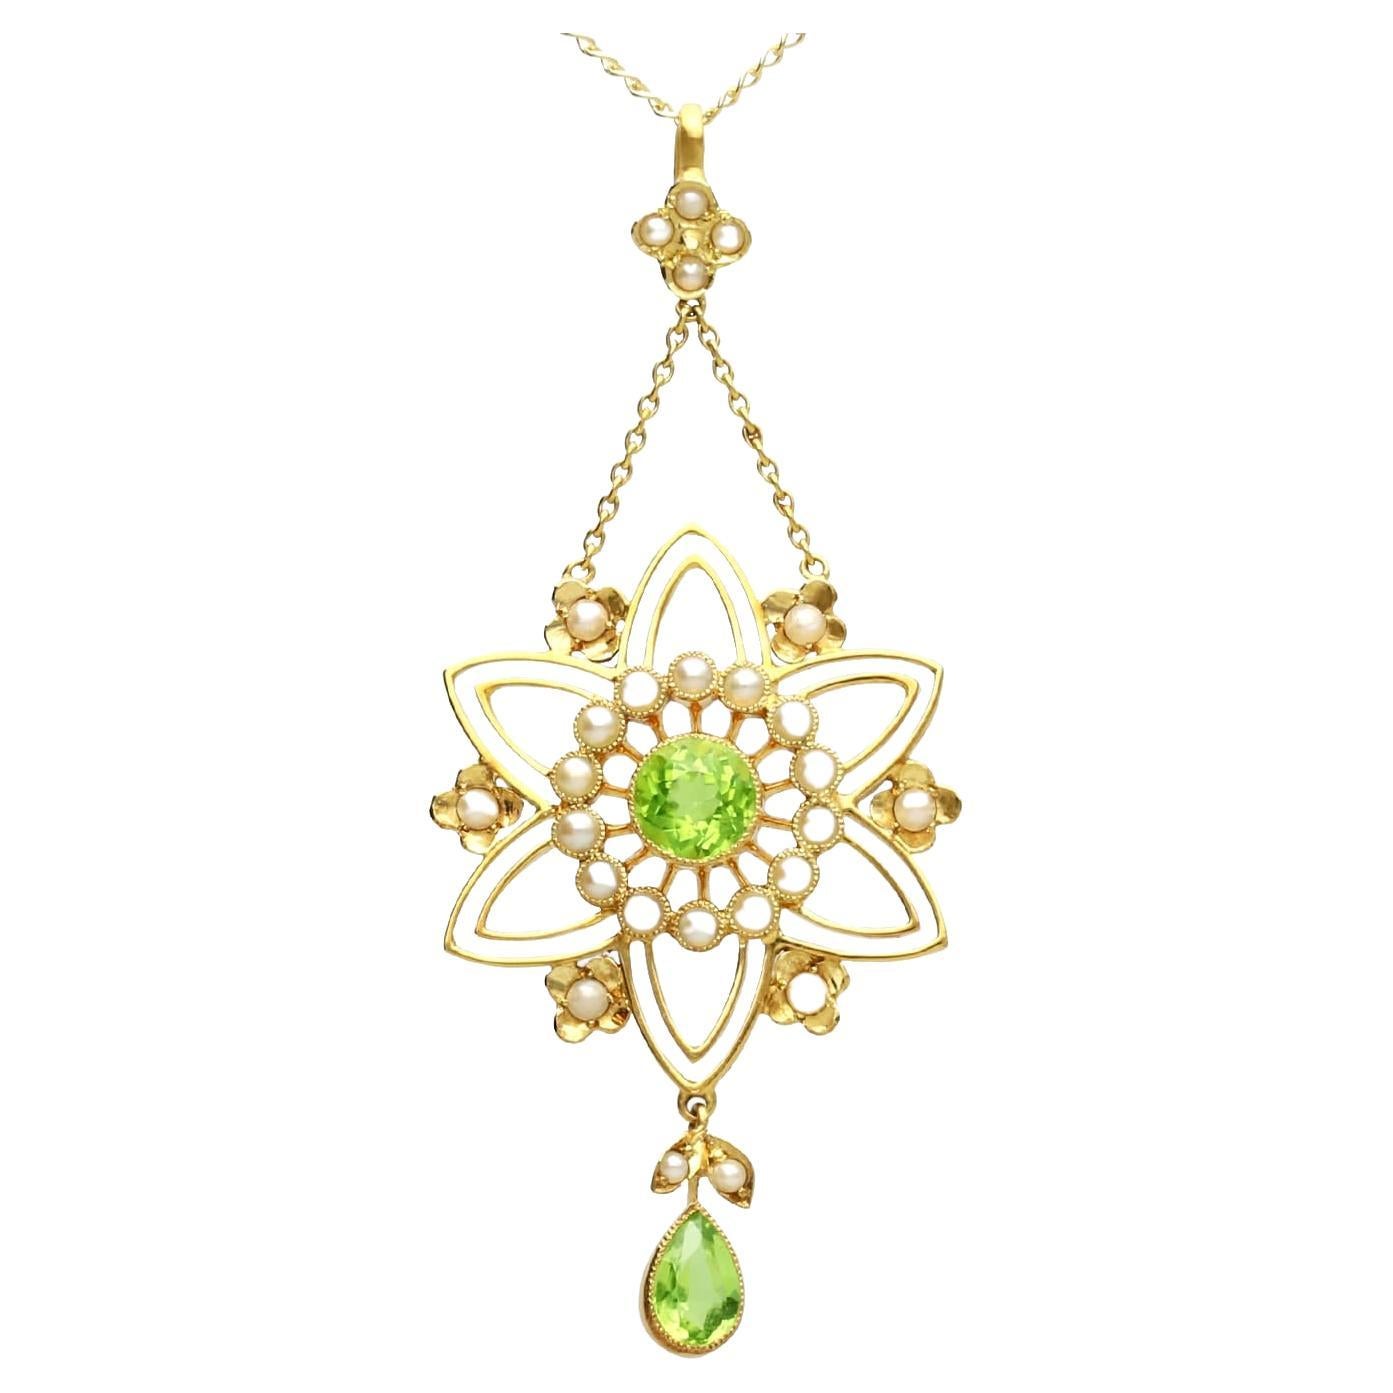 1800s Antique 1.78 Carat Peridot Pearl and 15k Yellow Gold Pendant